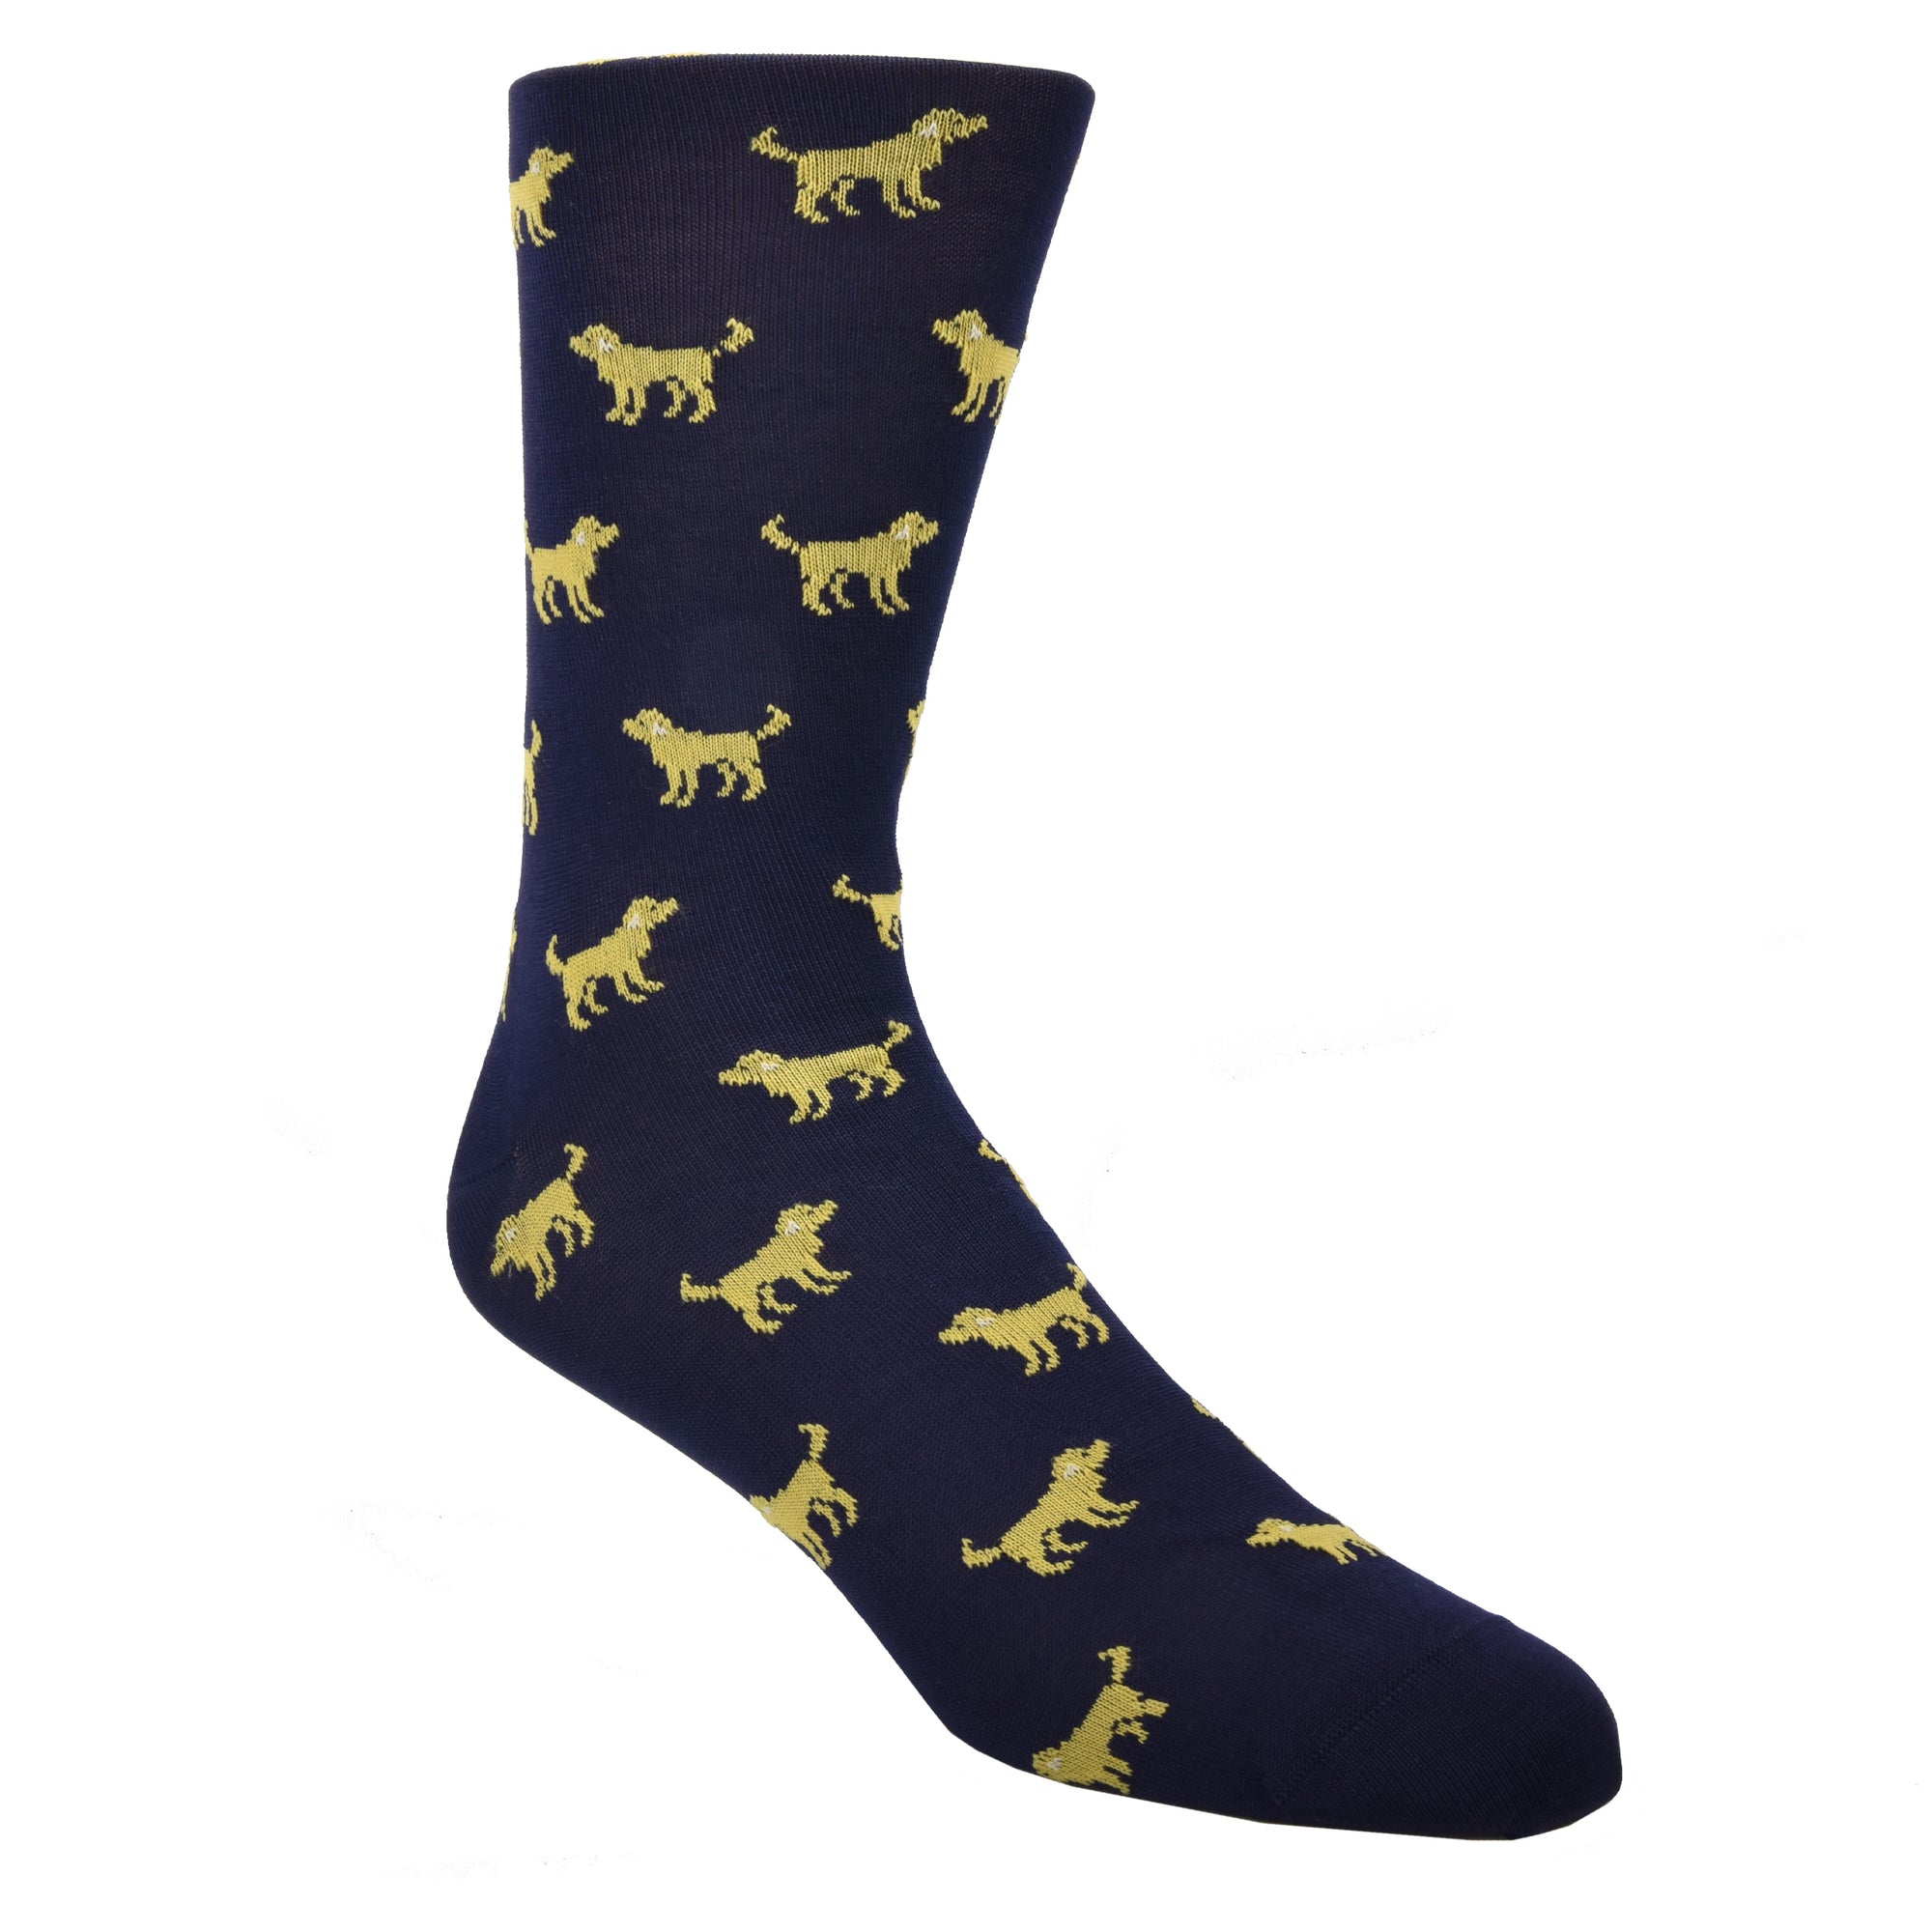 An homage to man's best friend, perfect for your barking dogs. Life is too short to wear boring socks! #damnrightAn homage to man's best friend, perfect for your barking dogs. Life is too short to wear boring socks! #damnright  70% Mercerized Cotton 29% Nylon 1% Spandex Fits Size 8-12 Machine Washable Made in the USA